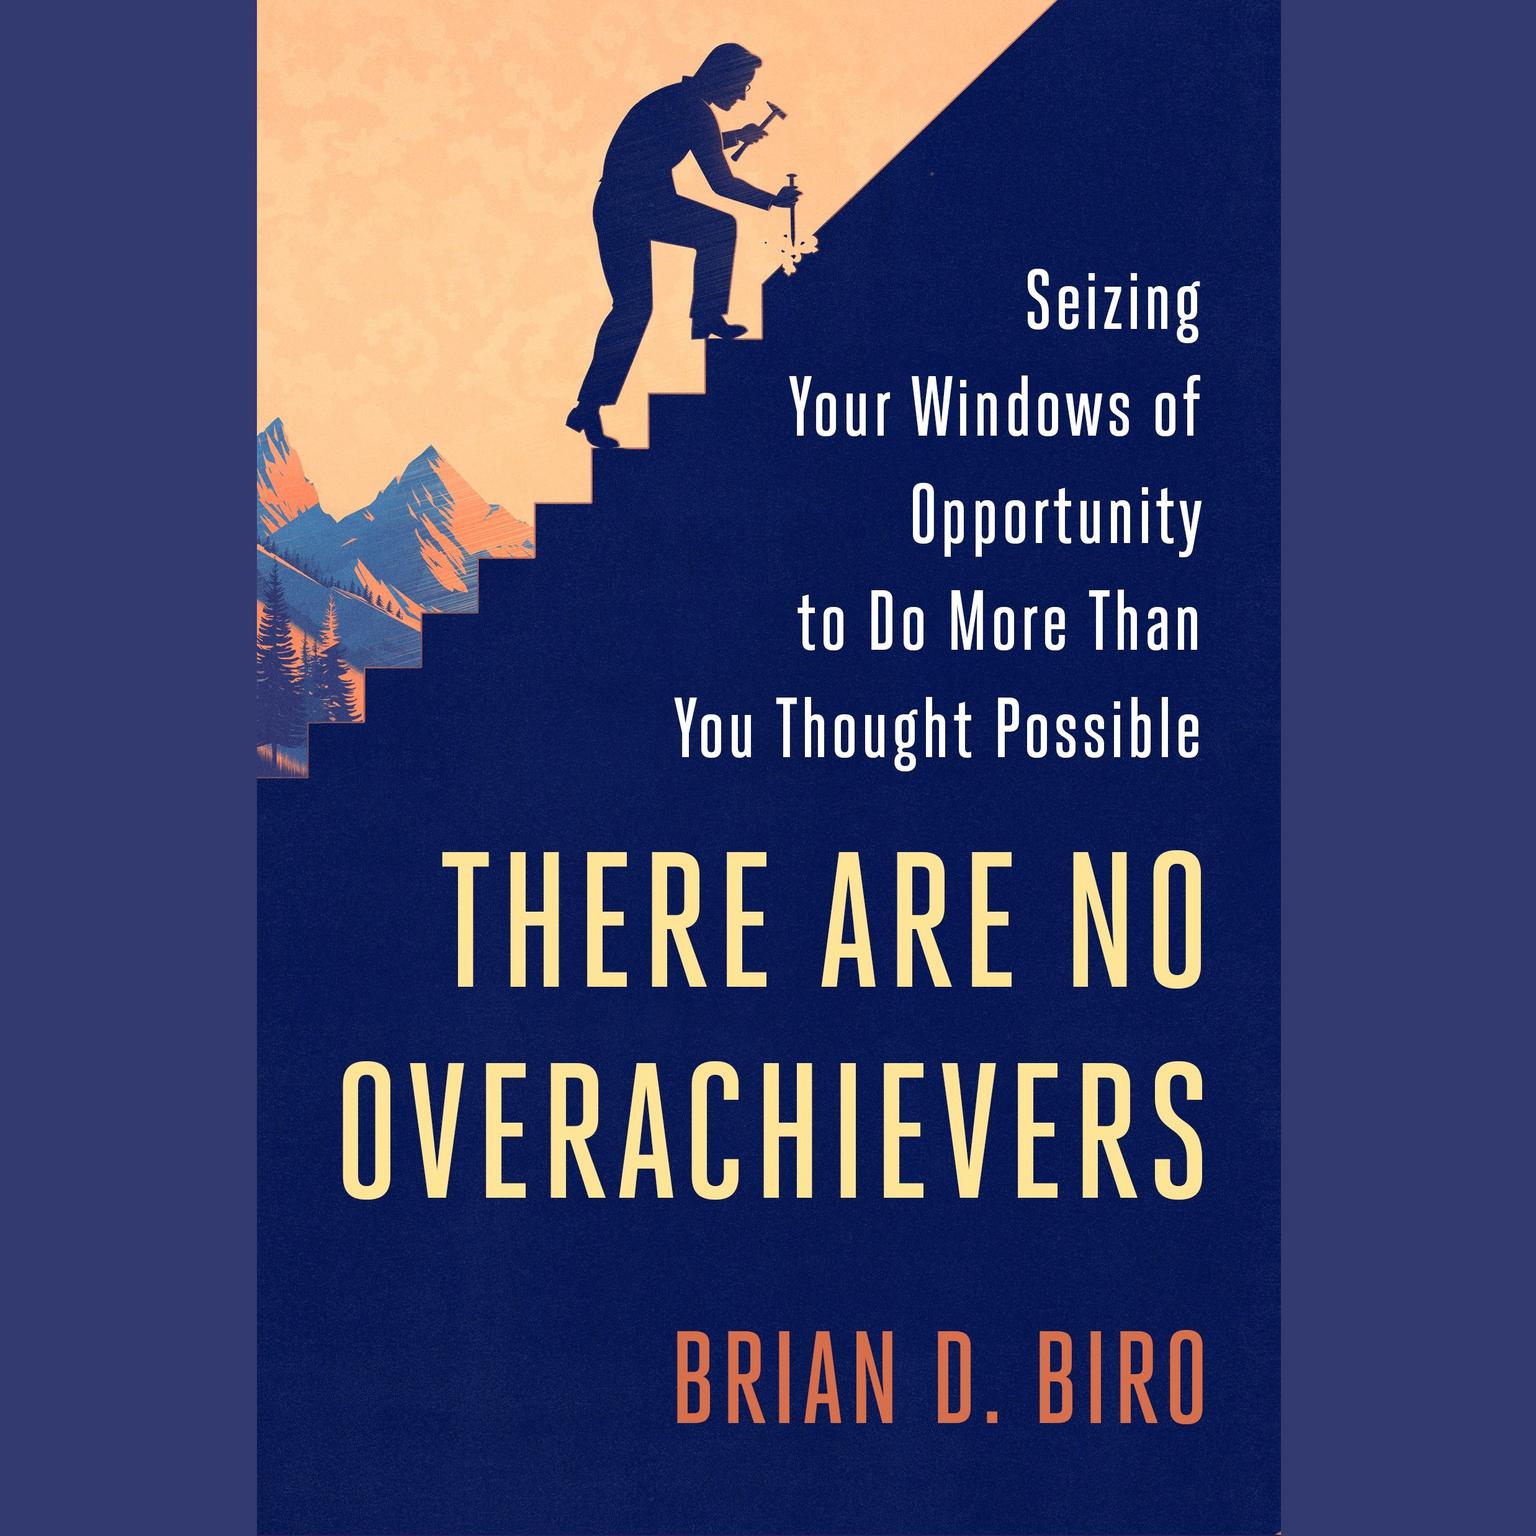 There Are No Overachievers: Seizing Your Windows of Opportunity to Do More Than You Thought Possible Audiobook, by Brian D. Biro